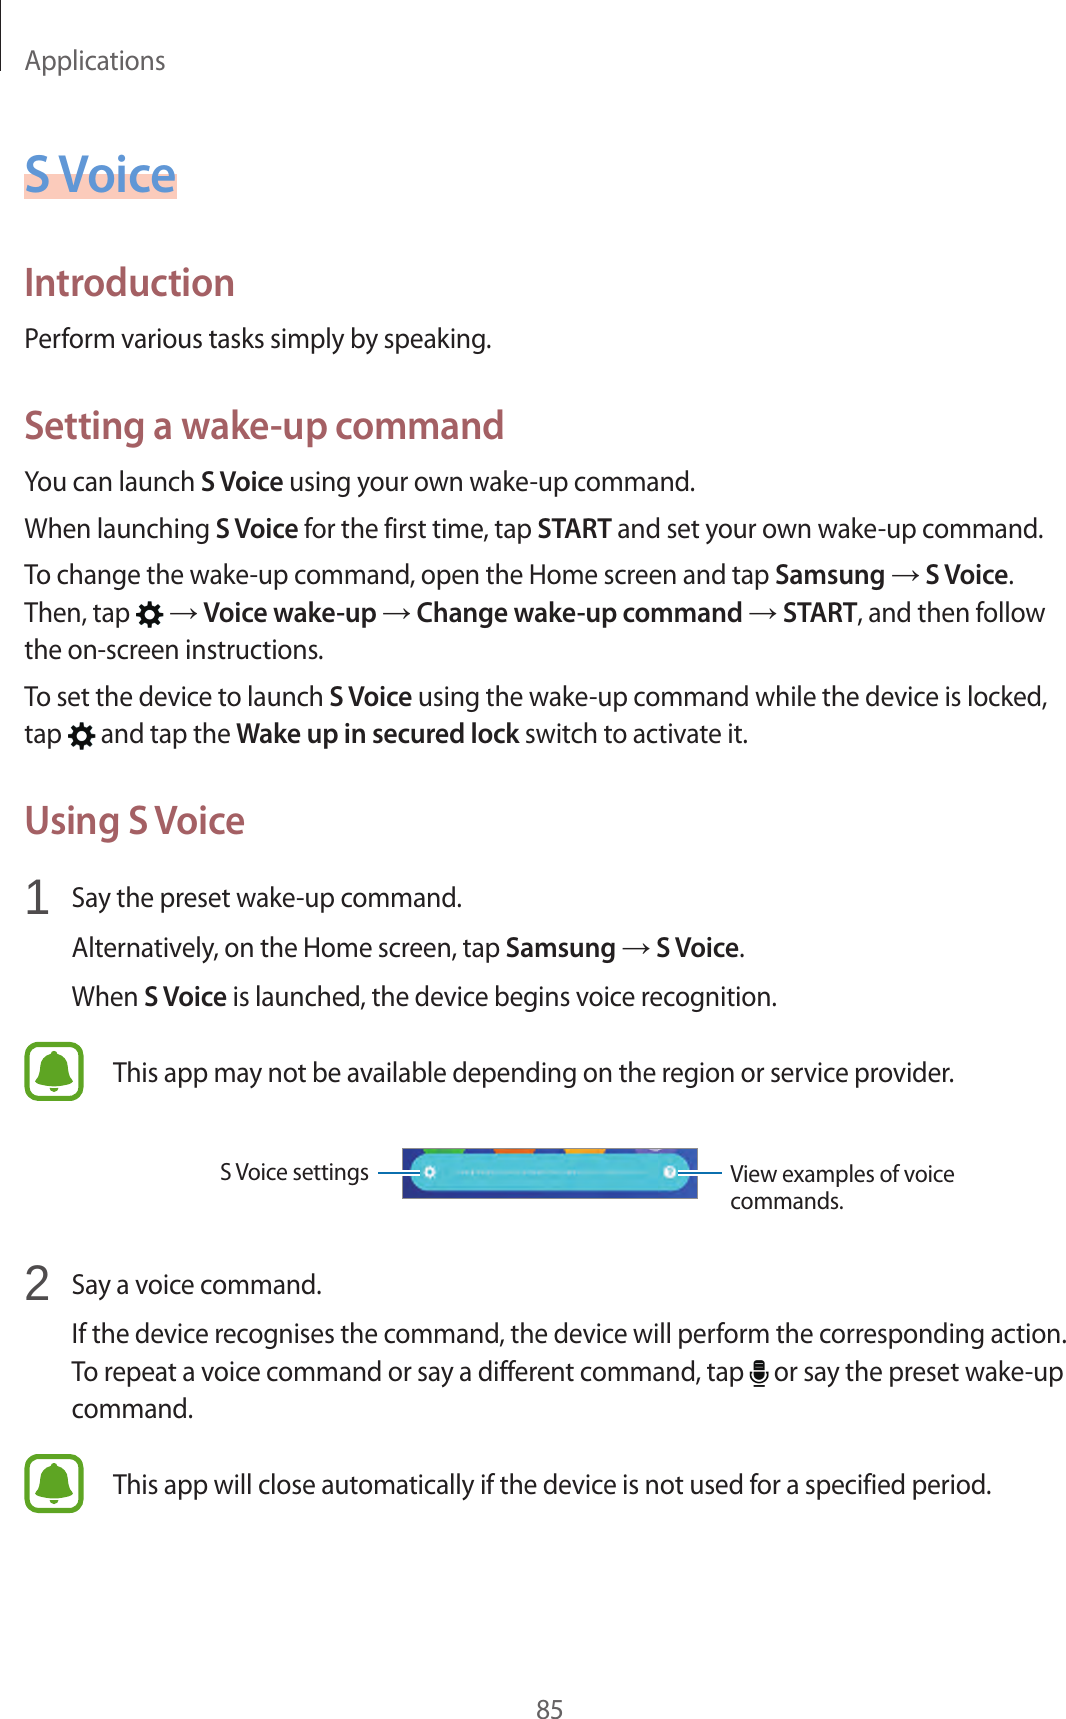 Applications85S VoiceIntroductionPerform various tasks simply by speaking.Setting a wake-up commandYou can launch S Voice using your own wake-up command.When launching S Voice for the first time, tap START and set your own wake-up command.To change the wake-up command, open the Home screen and tap Samsung → S Voice. Then, tap   → Voice wake-up → Change wake-up command → START, and then follow the on-screen instructions.To set the device to launch S Voice using the wake-up command while the device is locked, tap   and tap the Wake up in secured lock switch to activate it.Using S Voice1  Say the preset wake-up command.Alternatively, on the Home screen, tap Samsung → S Voice.When S Voice is launched, the device begins voice recognition.This app may not be available depending on the region or service provider.View examples of voice commands.S Voice settings2  Say a voice command.If the device recognises the command, the device will perform the corresponding action. To repeat a voice command or say a different command, tap   or say the preset wake-up command.This app will close automatically if the device is not used for a specified period.